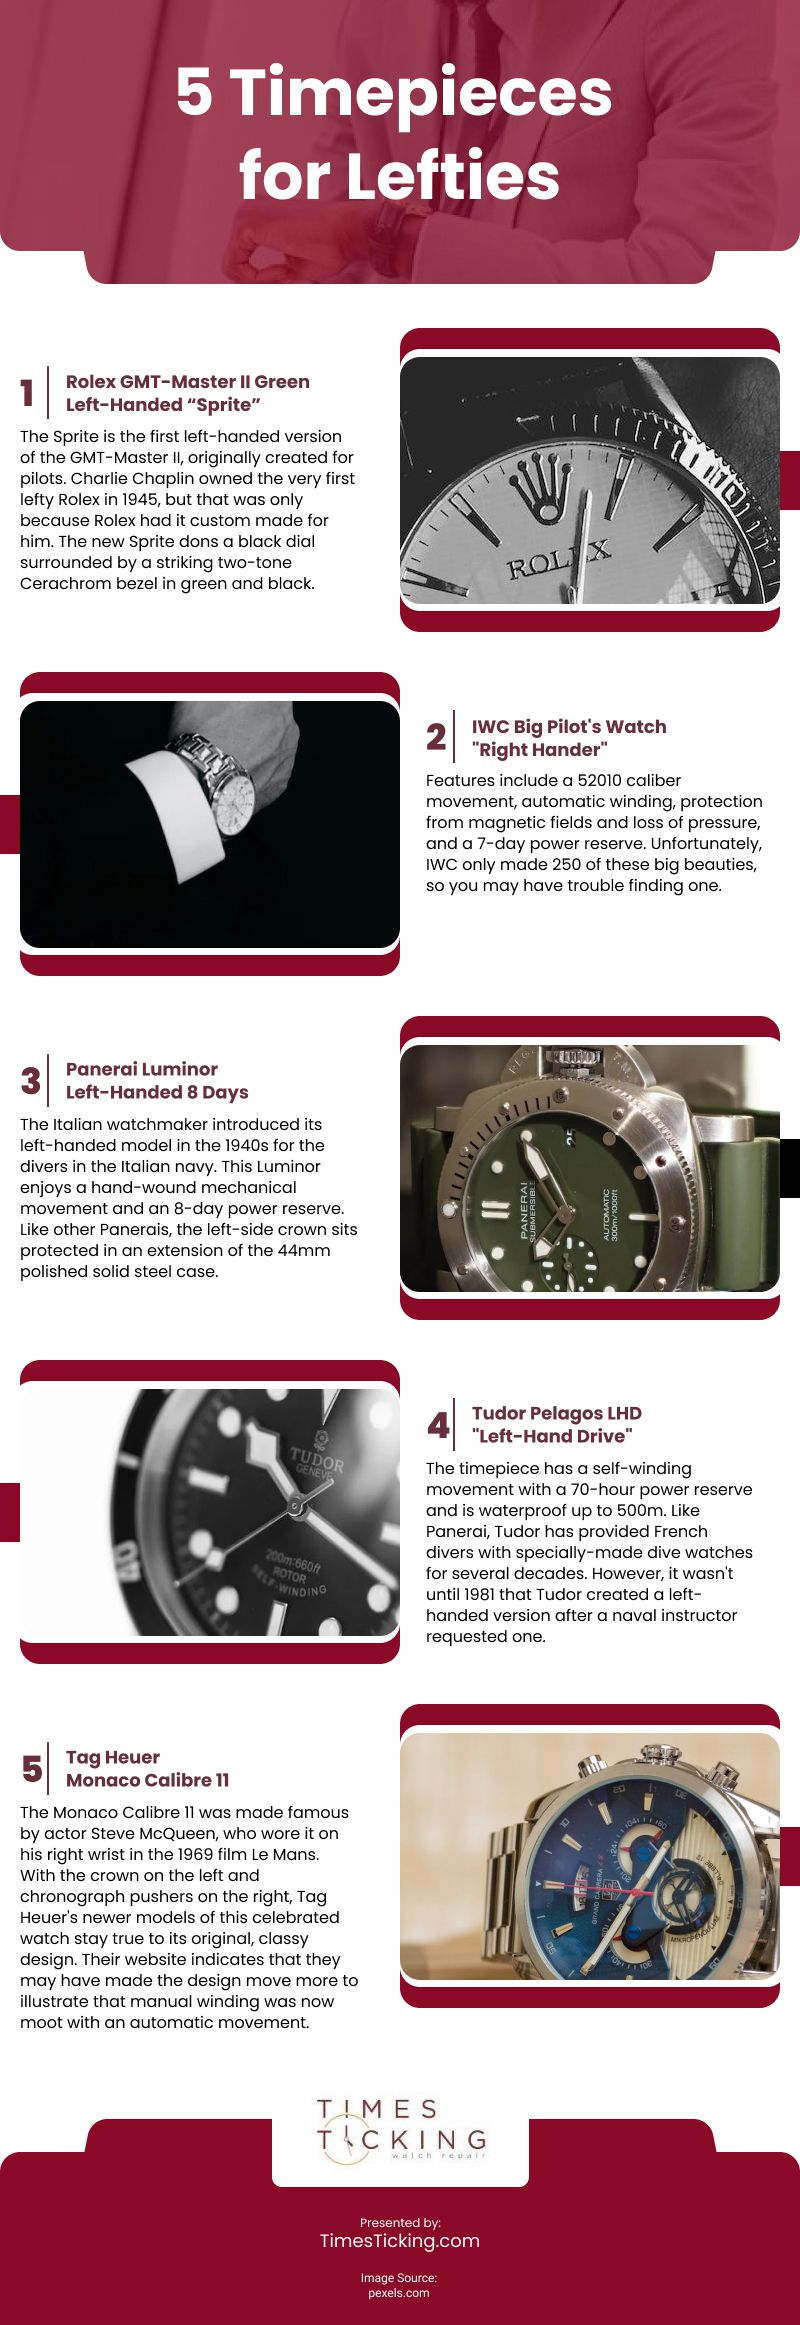 5 Timepieces for Lefties Infographic